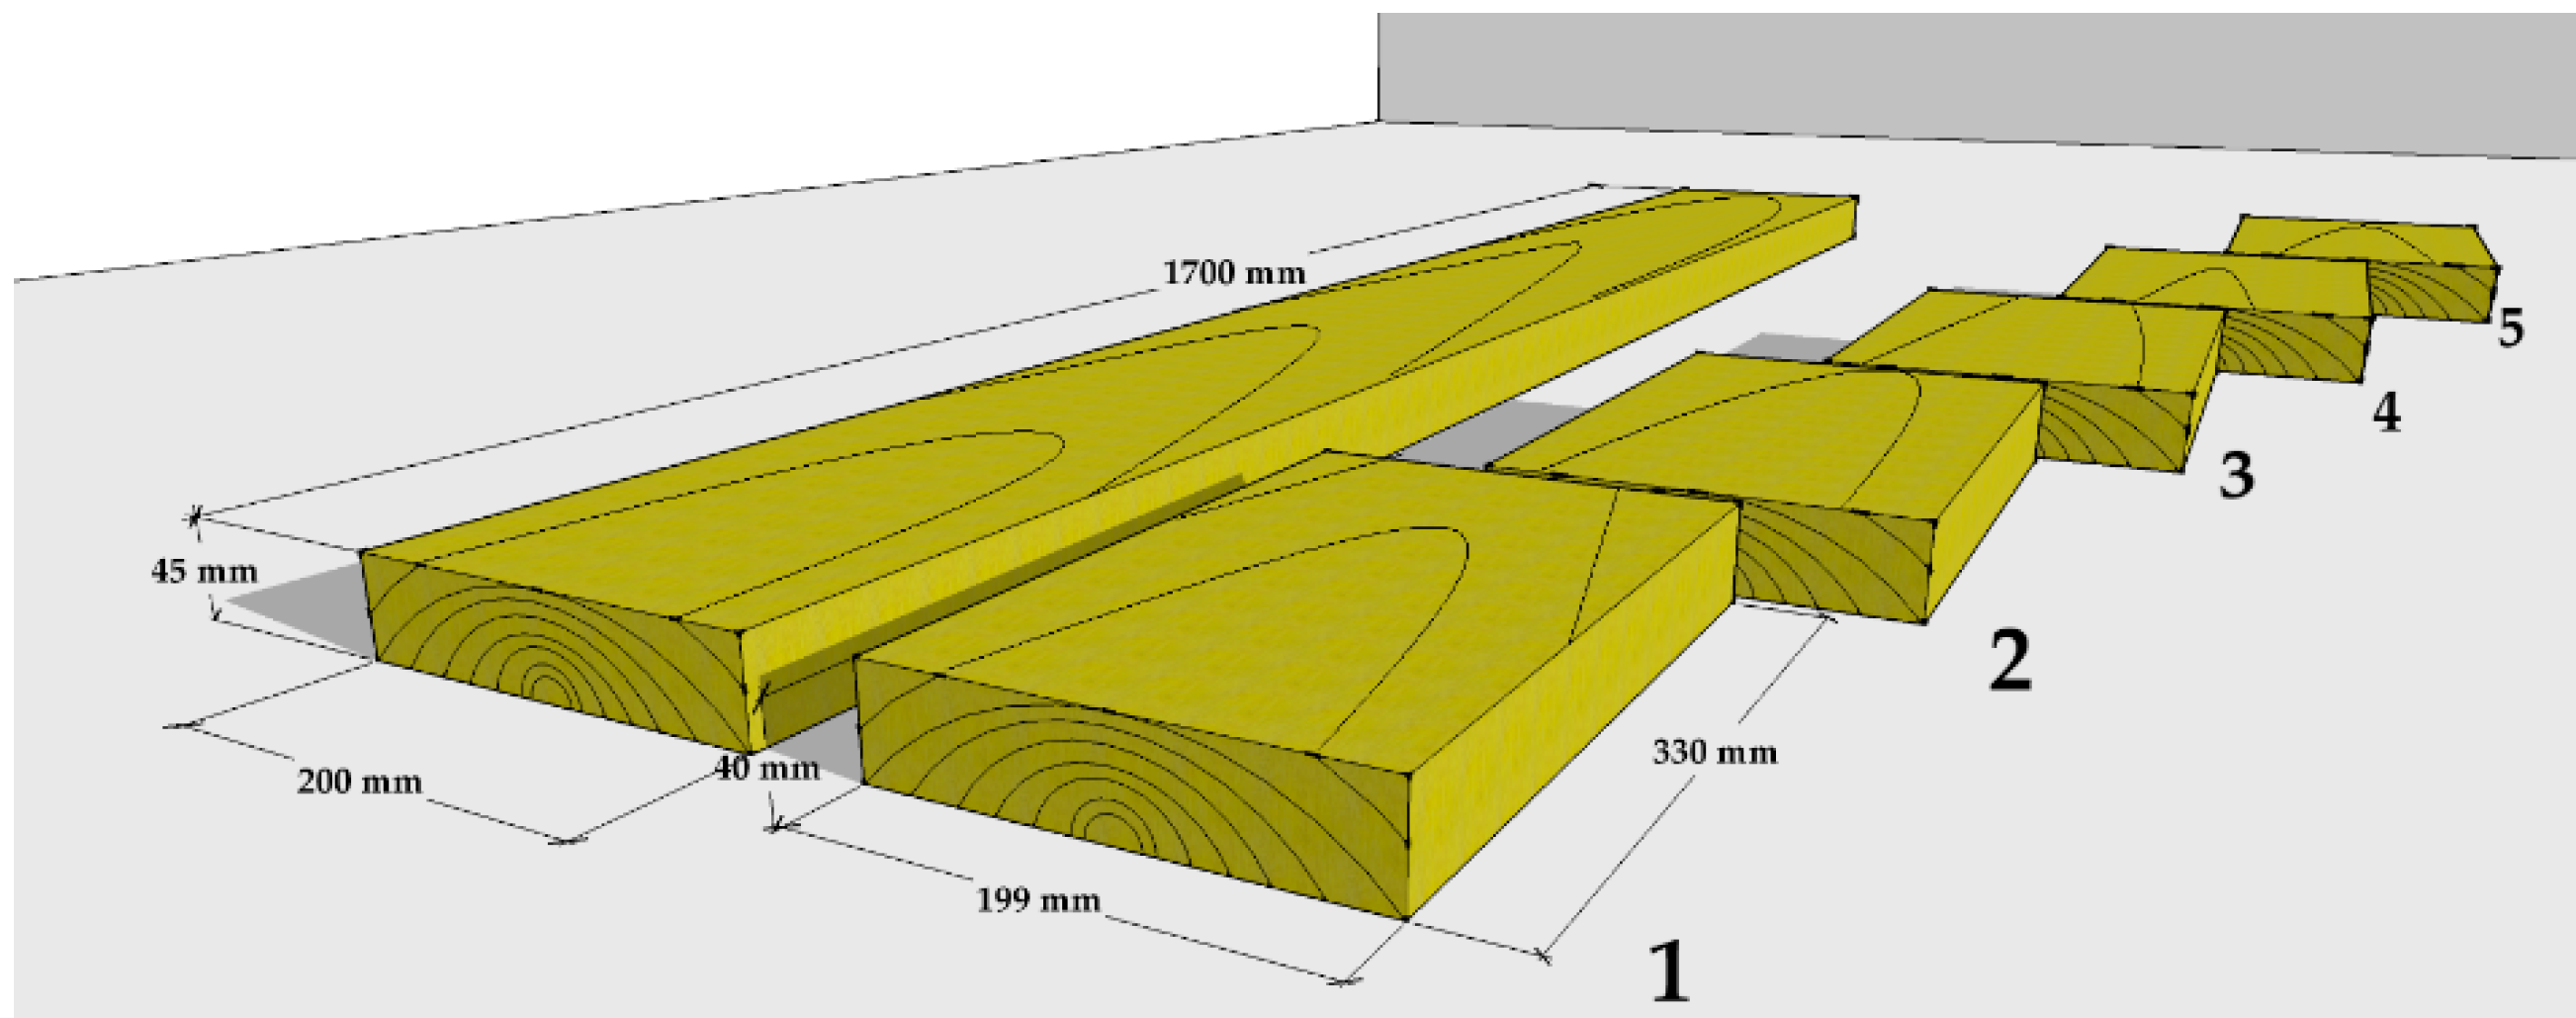 Forests | Free Full-Text | Haptic and Aesthetic Properties of Heat-Treated  Modified Birch Wood | HTML